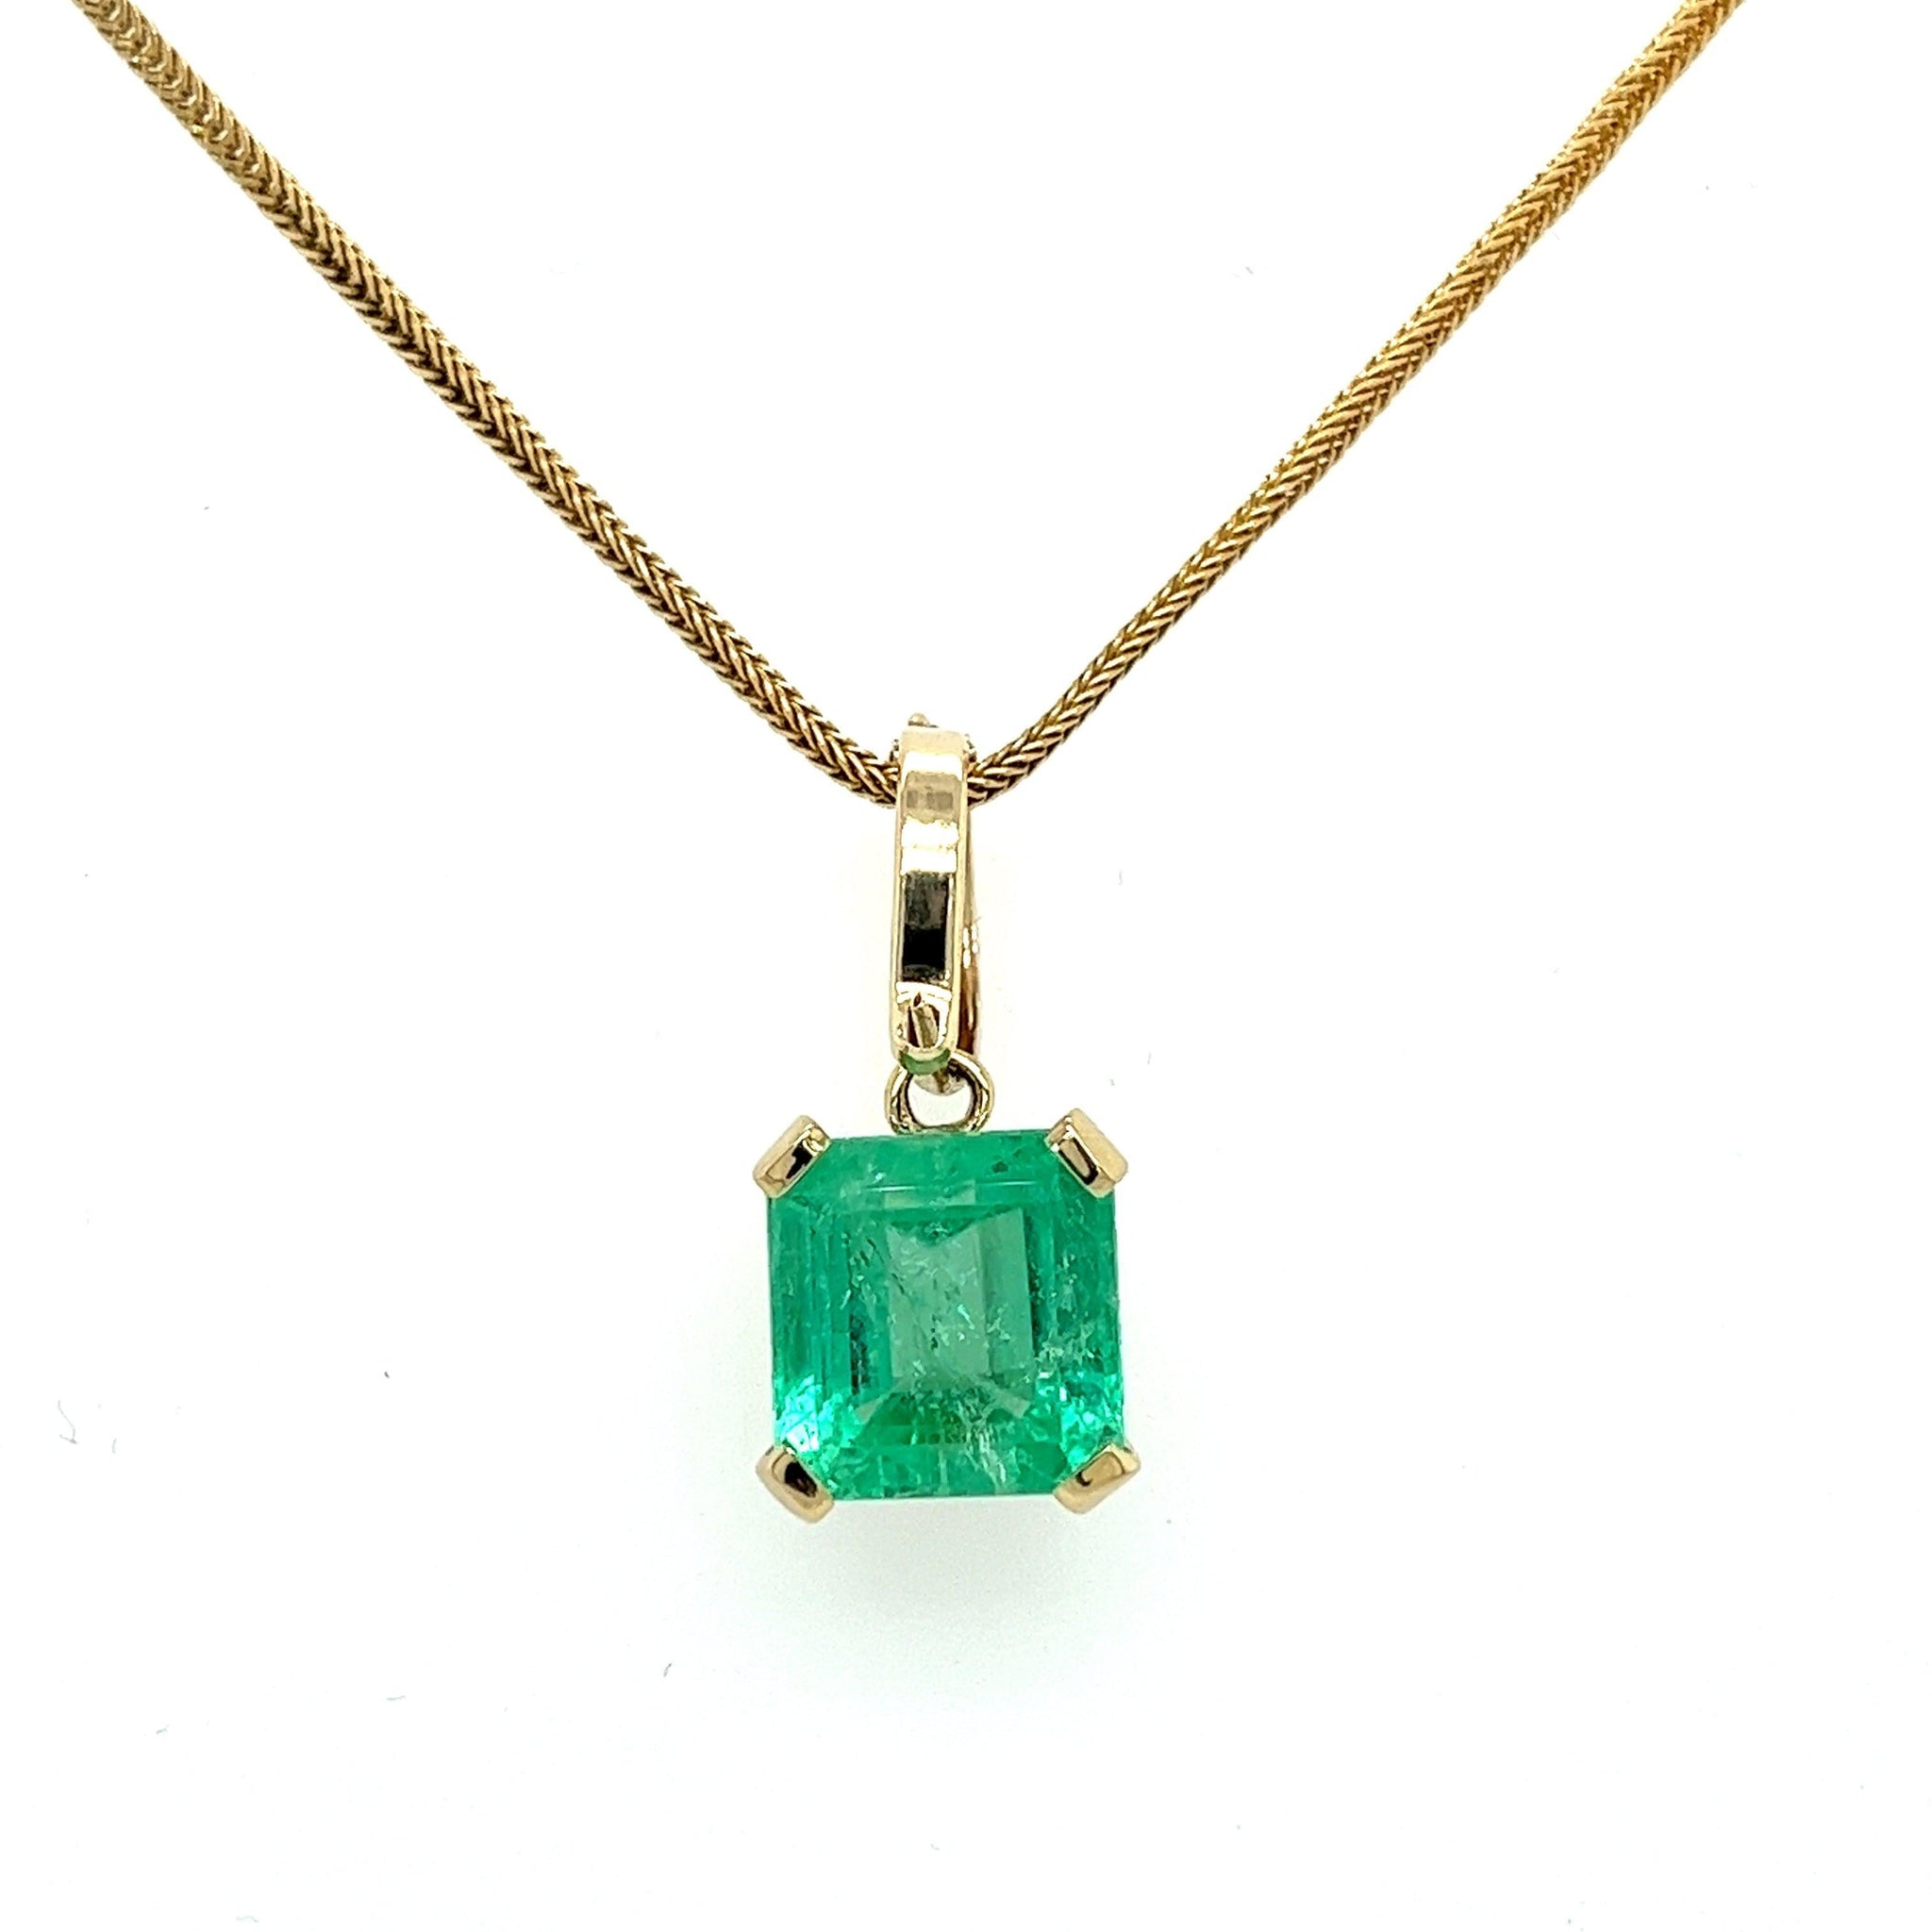 8 Carat Colombian Emerald Solitaire Pendant Necklace in 14k Gold-Necklaces-ASSAY